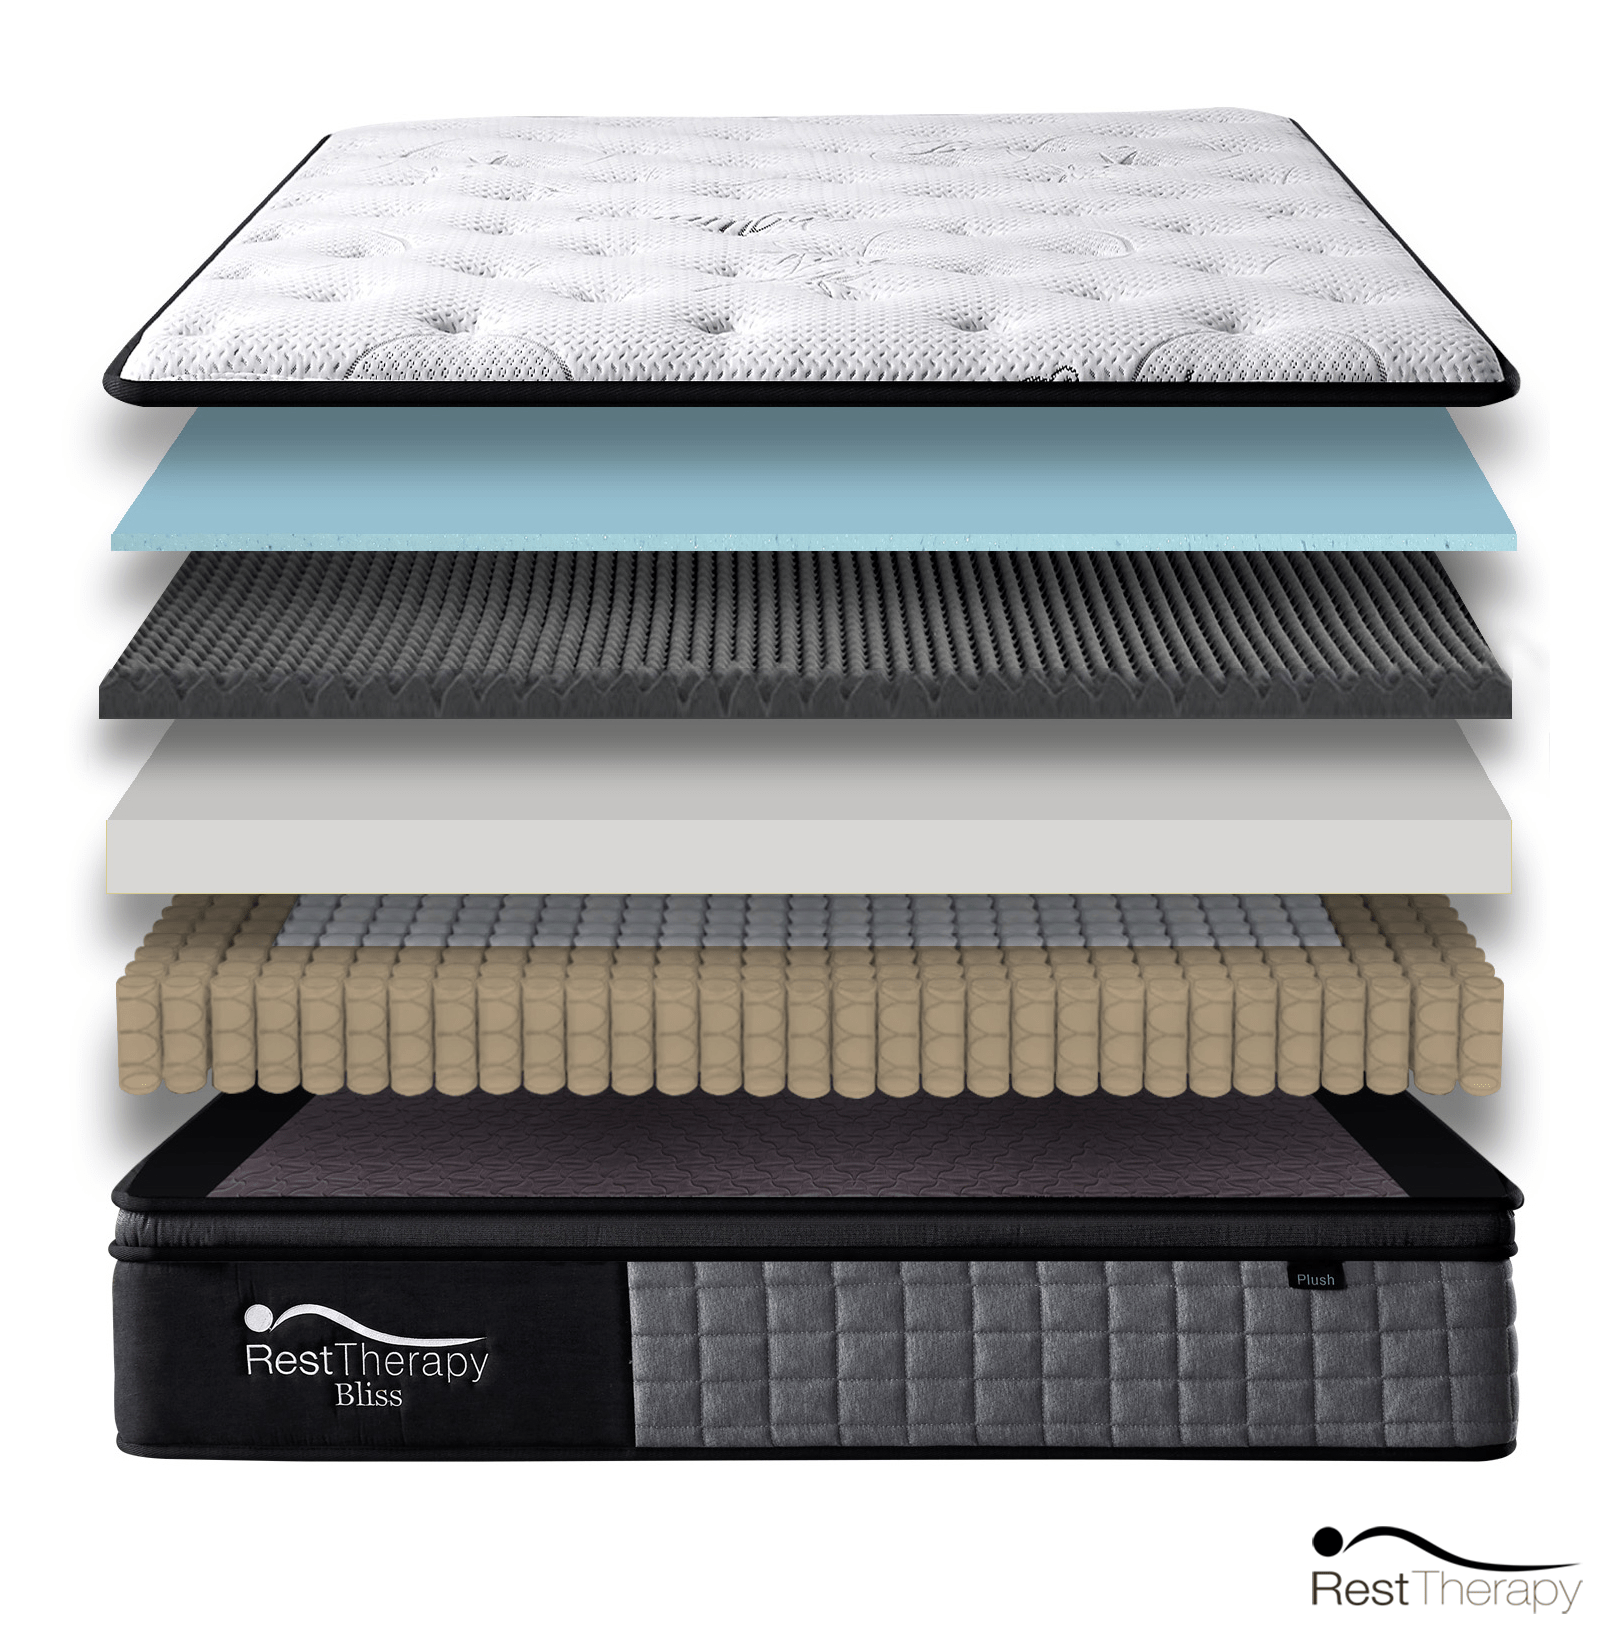 Rest Therapy Mattress 12 Inch Bliss Bamboo Plush Hybrid Pocket Coil Mattress with Cool Gel Memory Foam - Available in 4 Sizes